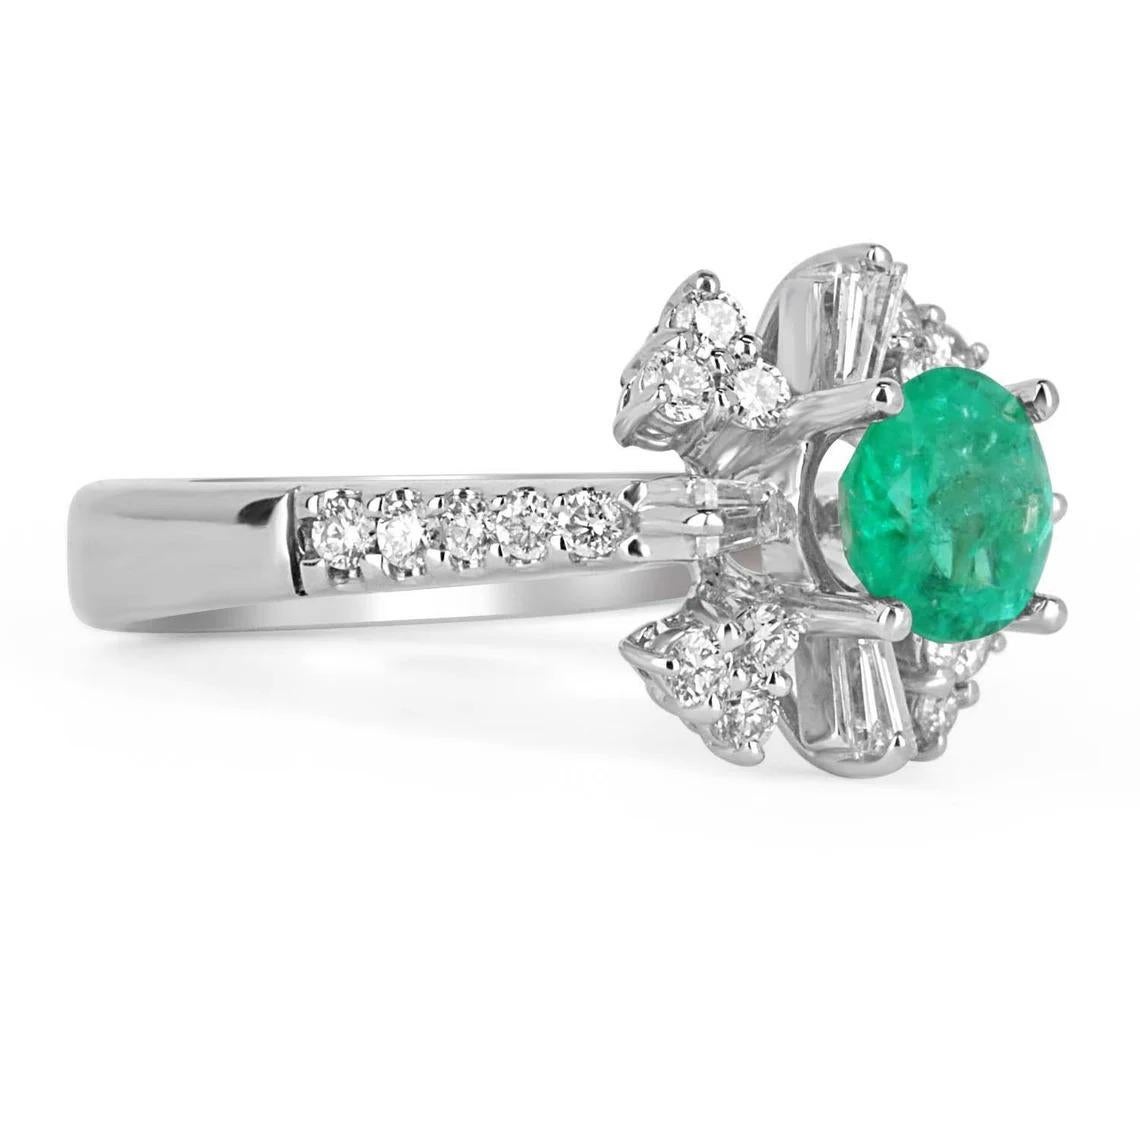 Featured here is a one of a kind, emerald and diamond statement ring. The center stone, carries a full 0.85-carats, of pure green beauty. Sourced from the famous mines of Muzo, Colombia, this stone displays a lovely vivid, medium-green color and